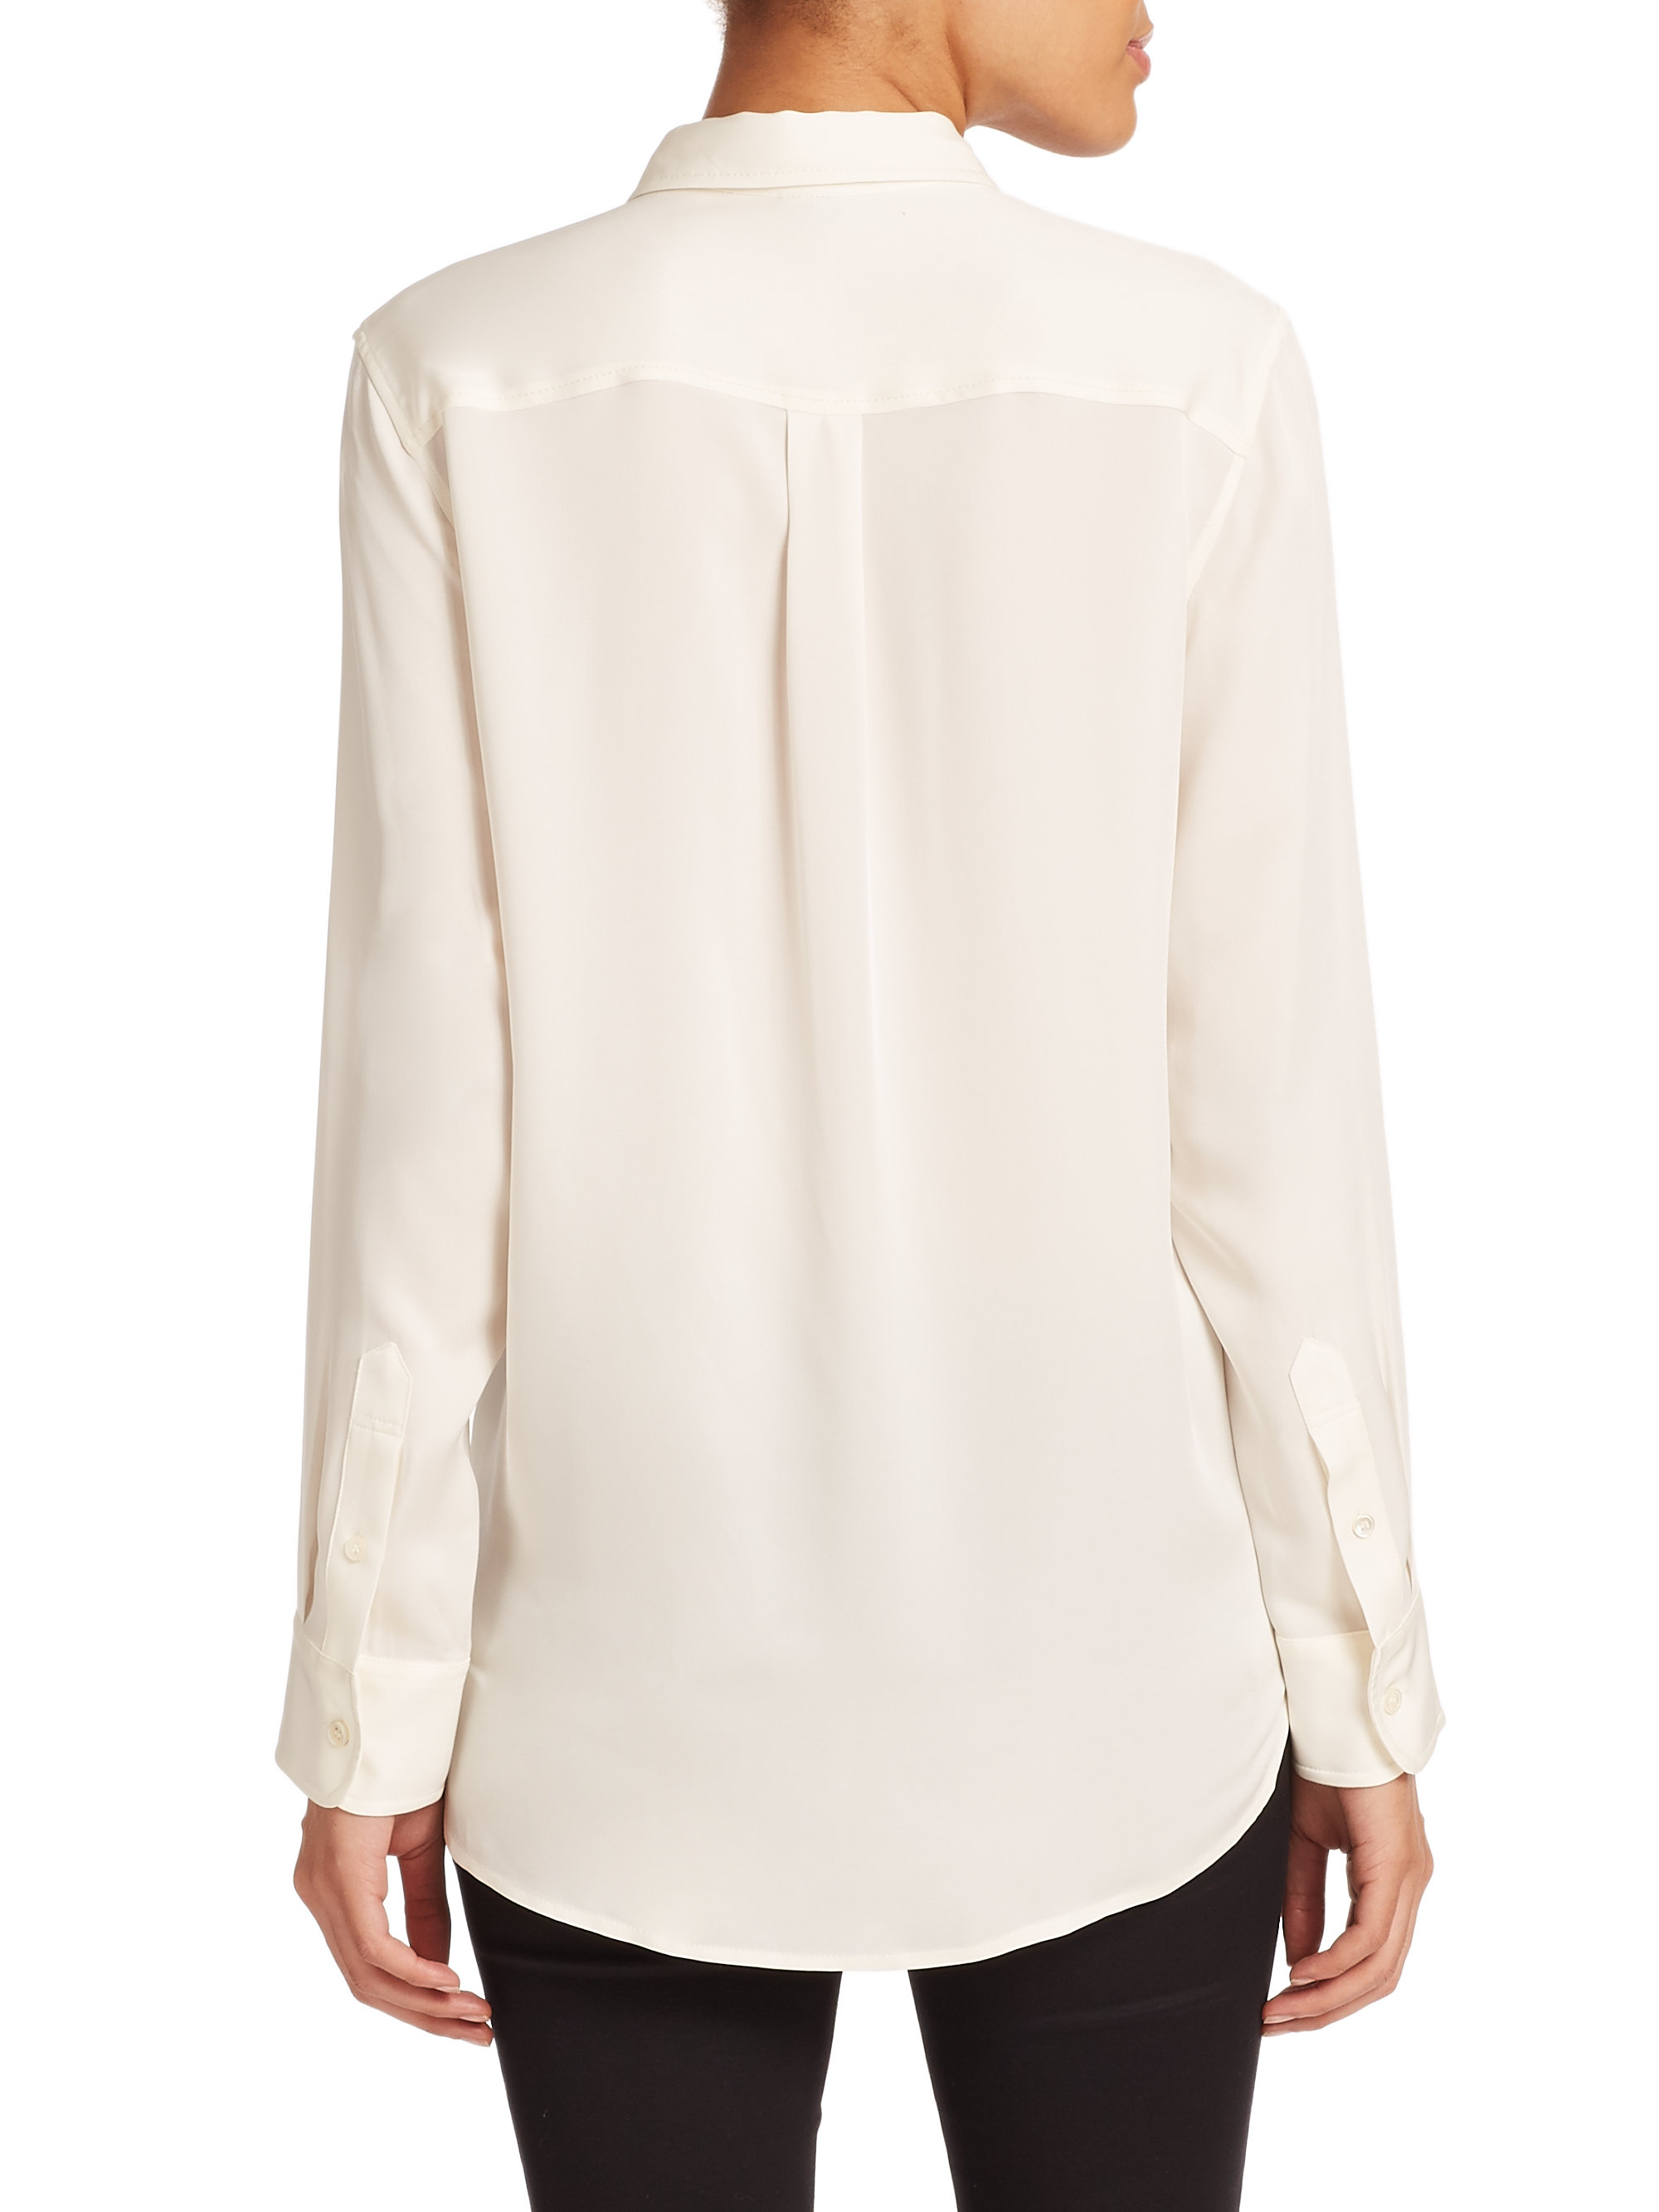 Theory Simara Silk Blouse in Ivory (White) - Lyst